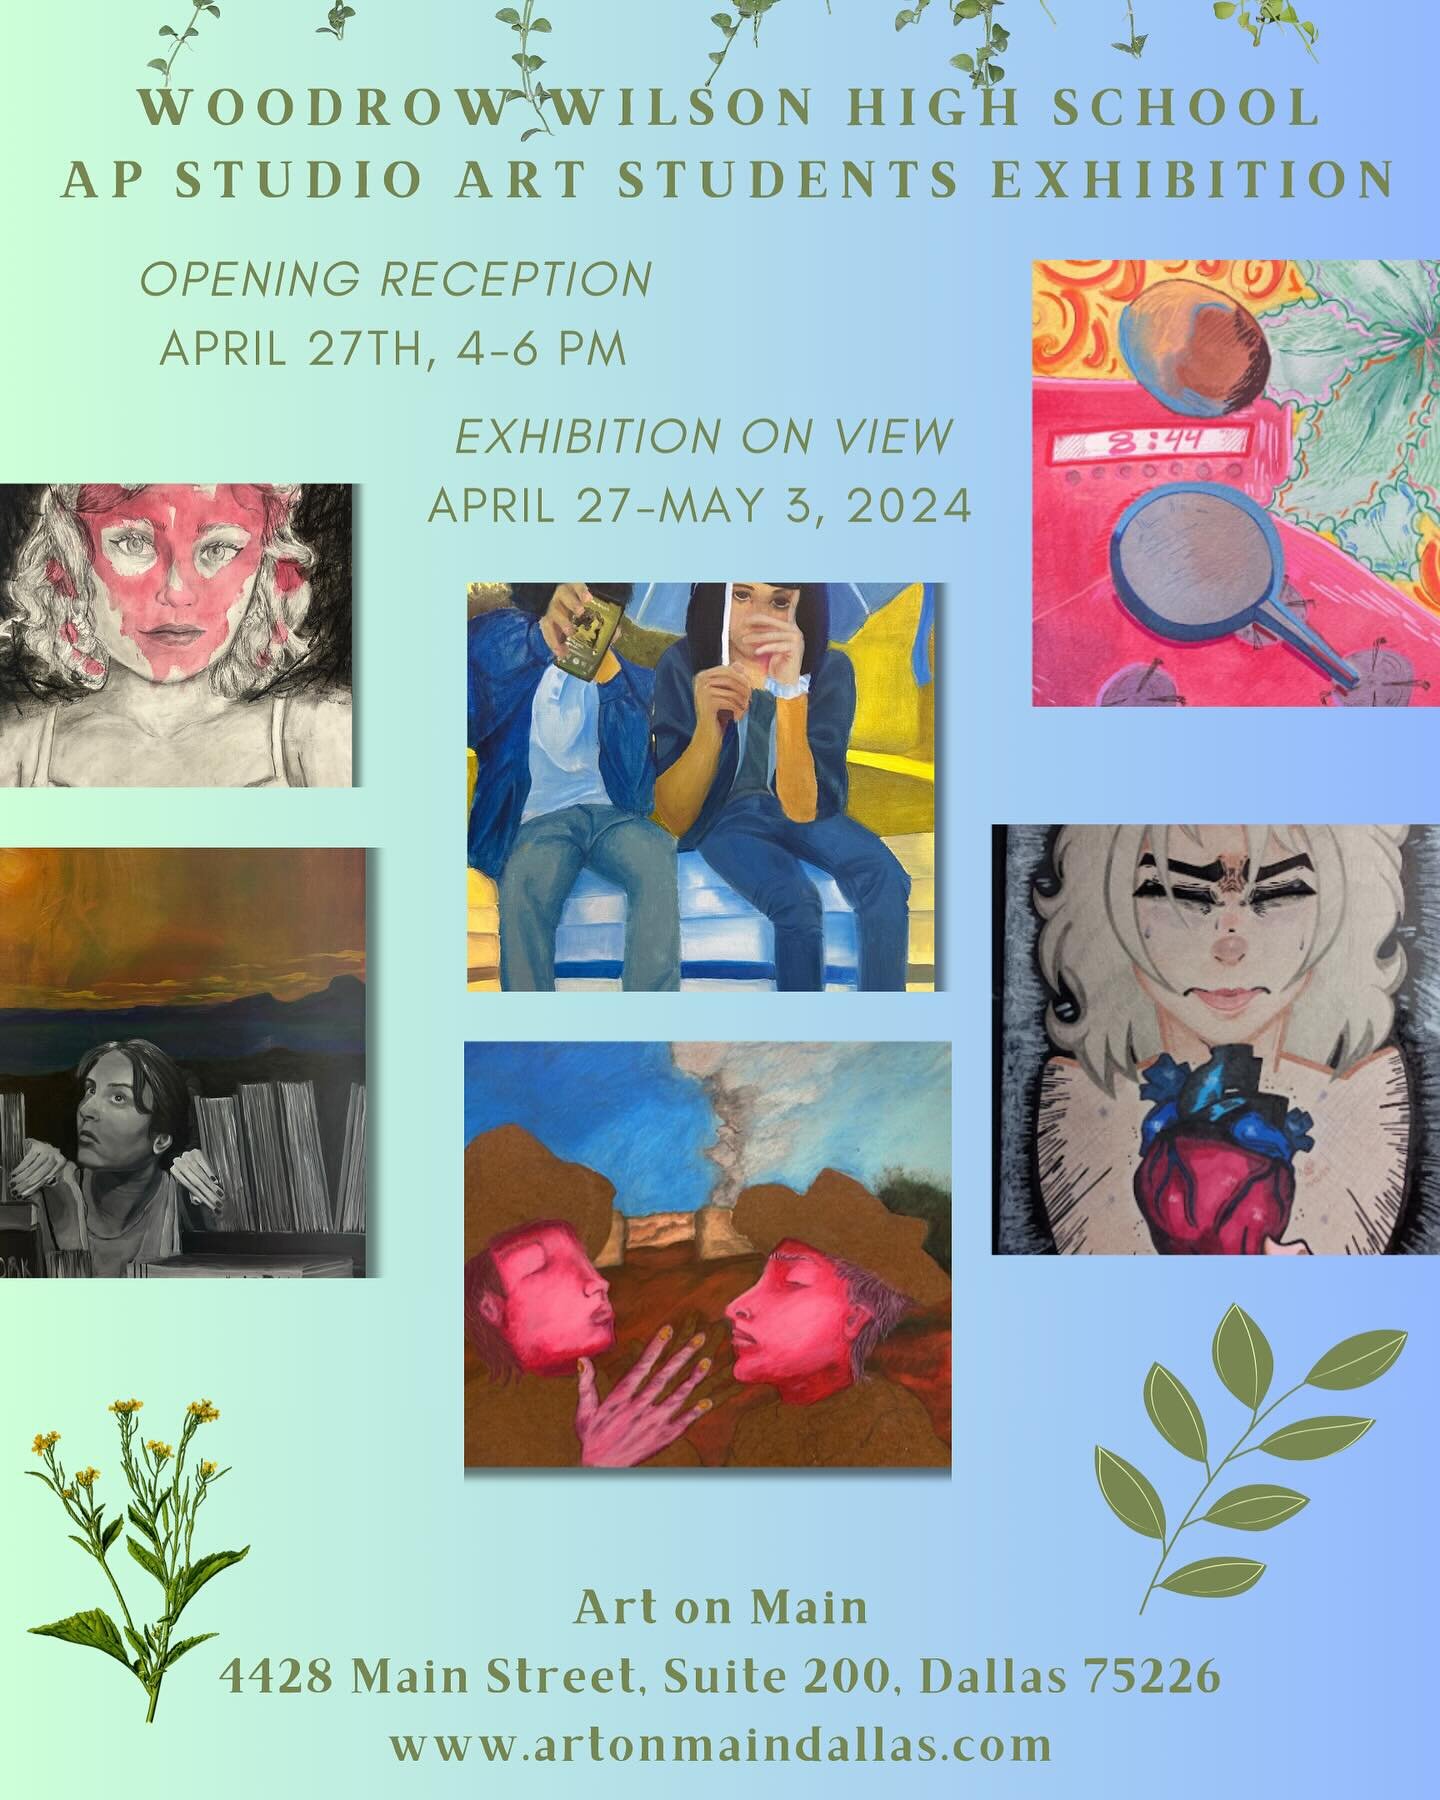 We are excited to announce we will be hosting the @woodrowwilsonhighschool @wwhs.visualart AP Studio Art Students Exhibition curated by their art teacher Katrina Rasmussen @kmrasmussenfineart . Please join us at the Opening Reception, Saturday, April